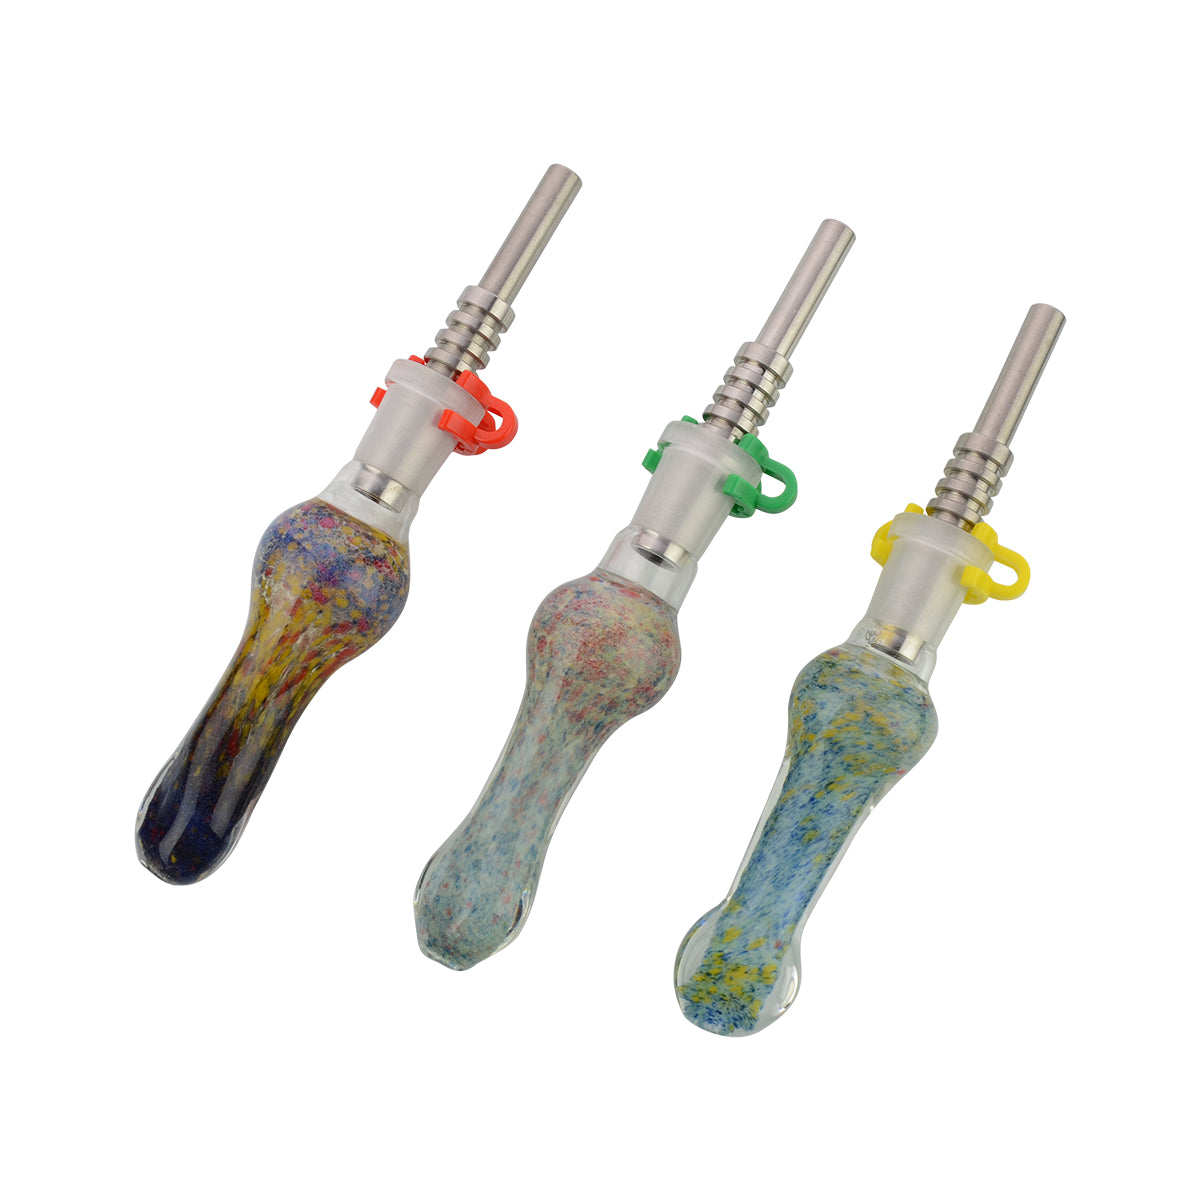 6'' Frit Glass Art Nectar Collector Concentrate Straw with 14mm Plastic Clip and Titanium NAIL